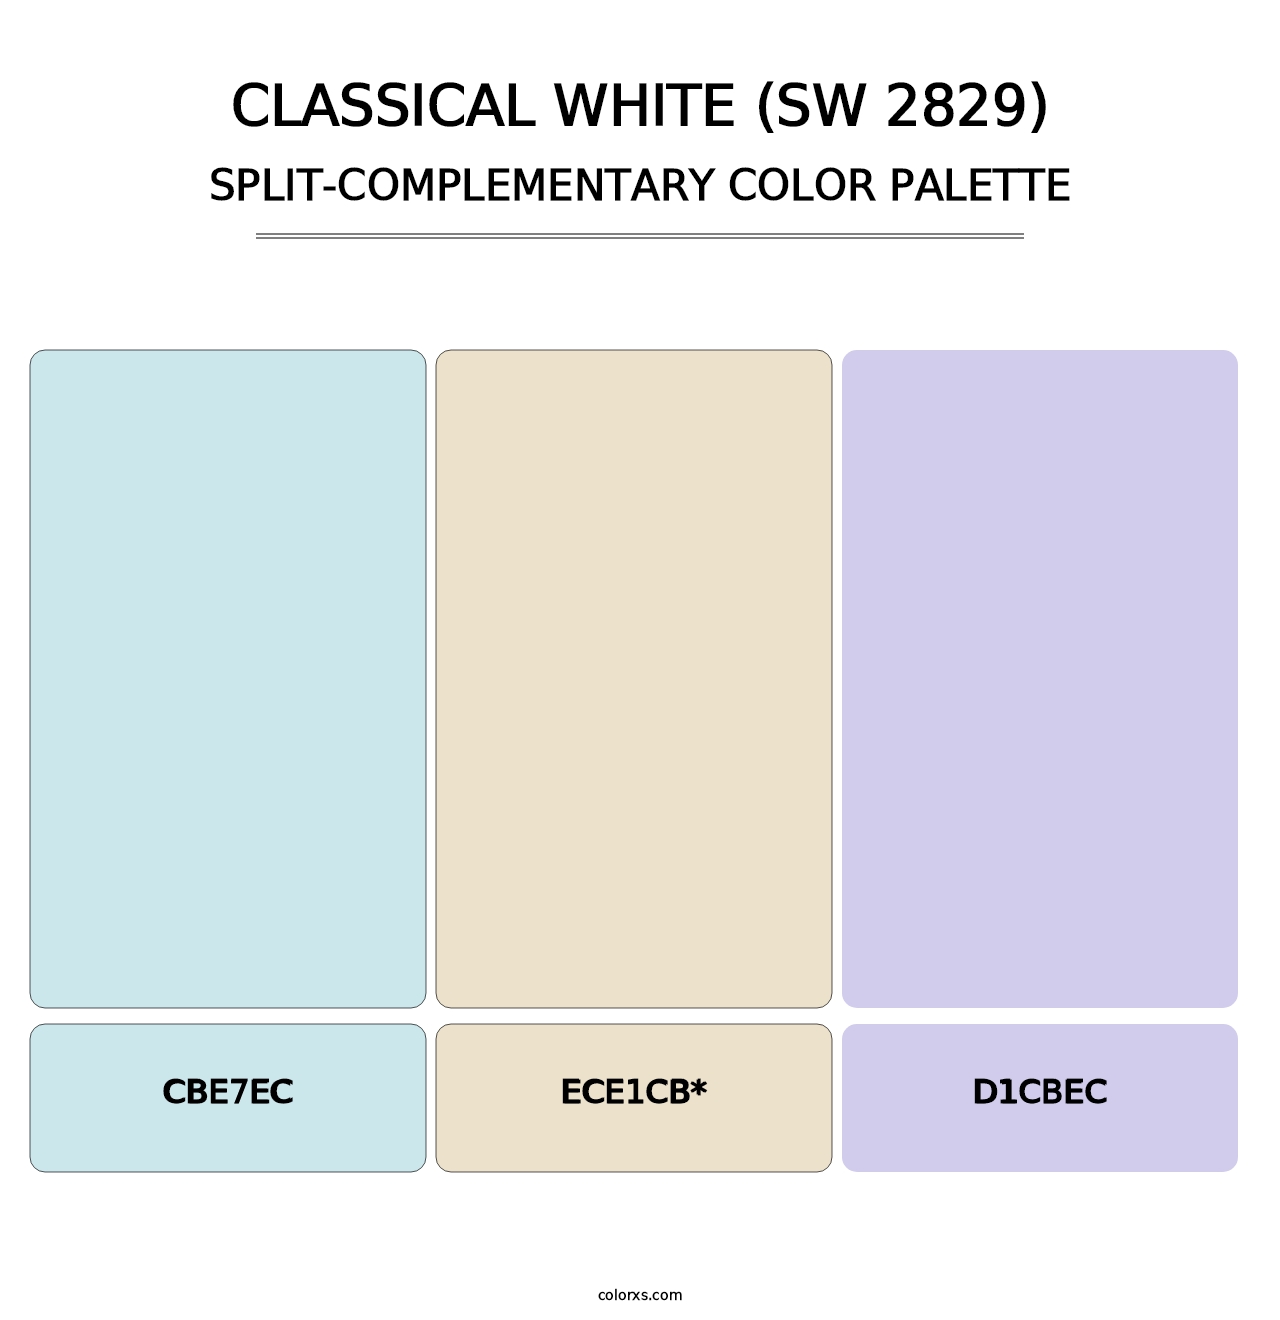 Classical White (SW 2829) - Split-Complementary Color Palette